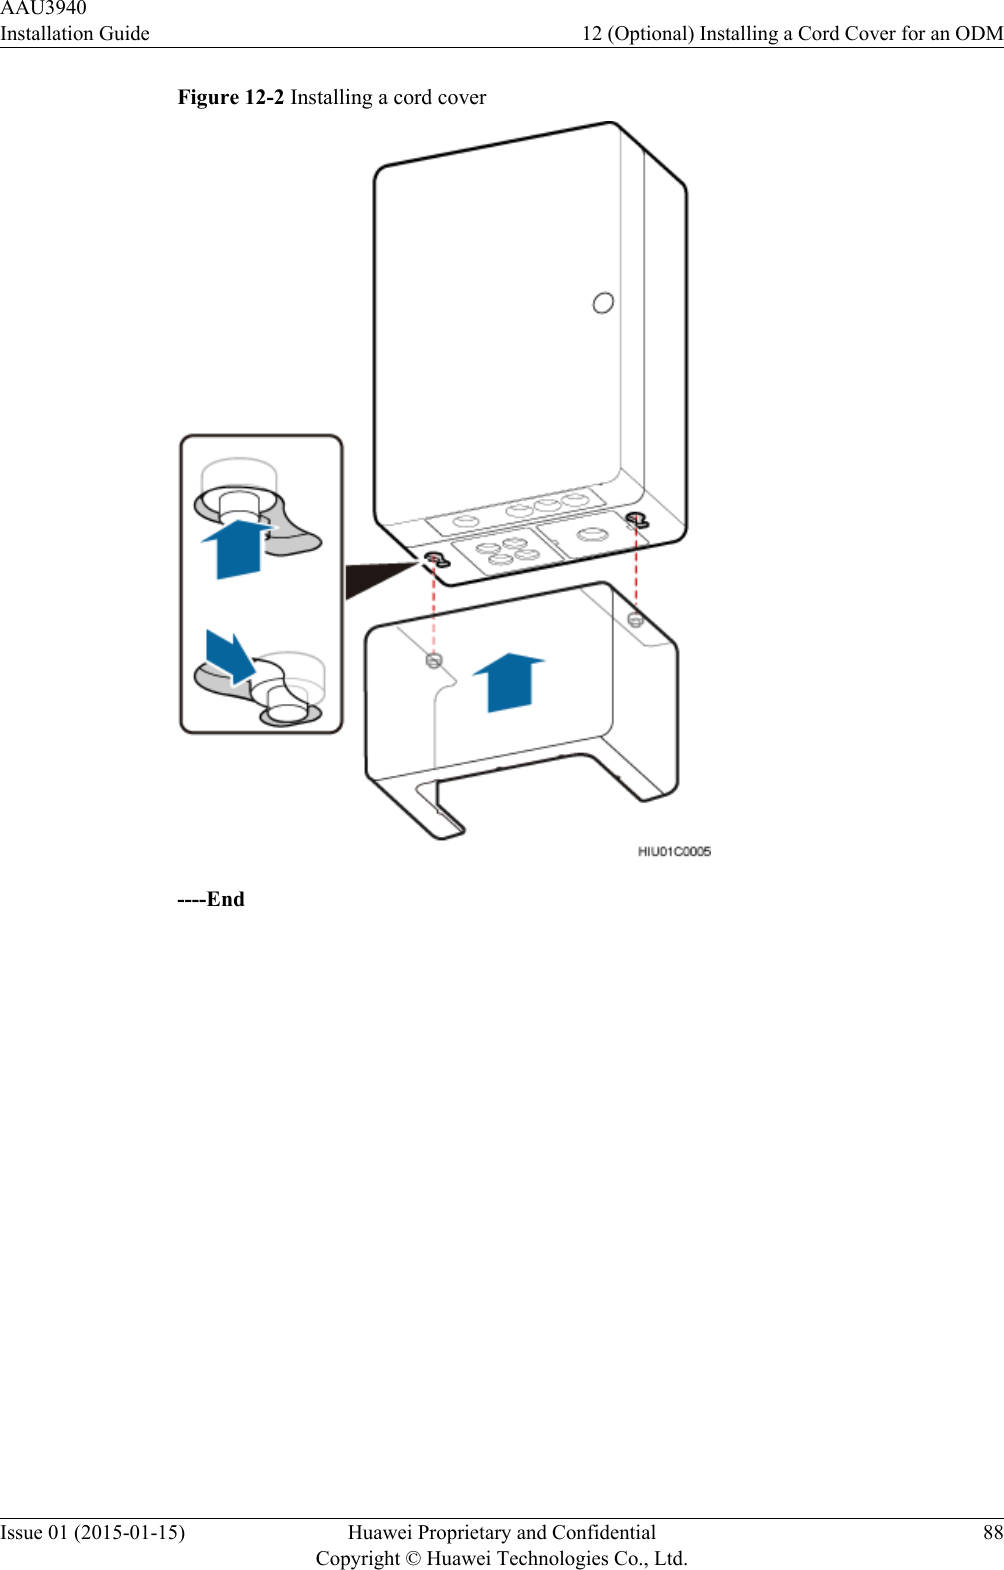 Figure 12-2 Installing a cord cover----EndAAU3940Installation Guide 12 (Optional) Installing a Cord Cover for an ODMIssue 01 (2015-01-15) Huawei Proprietary and ConfidentialCopyright © Huawei Technologies Co., Ltd.88